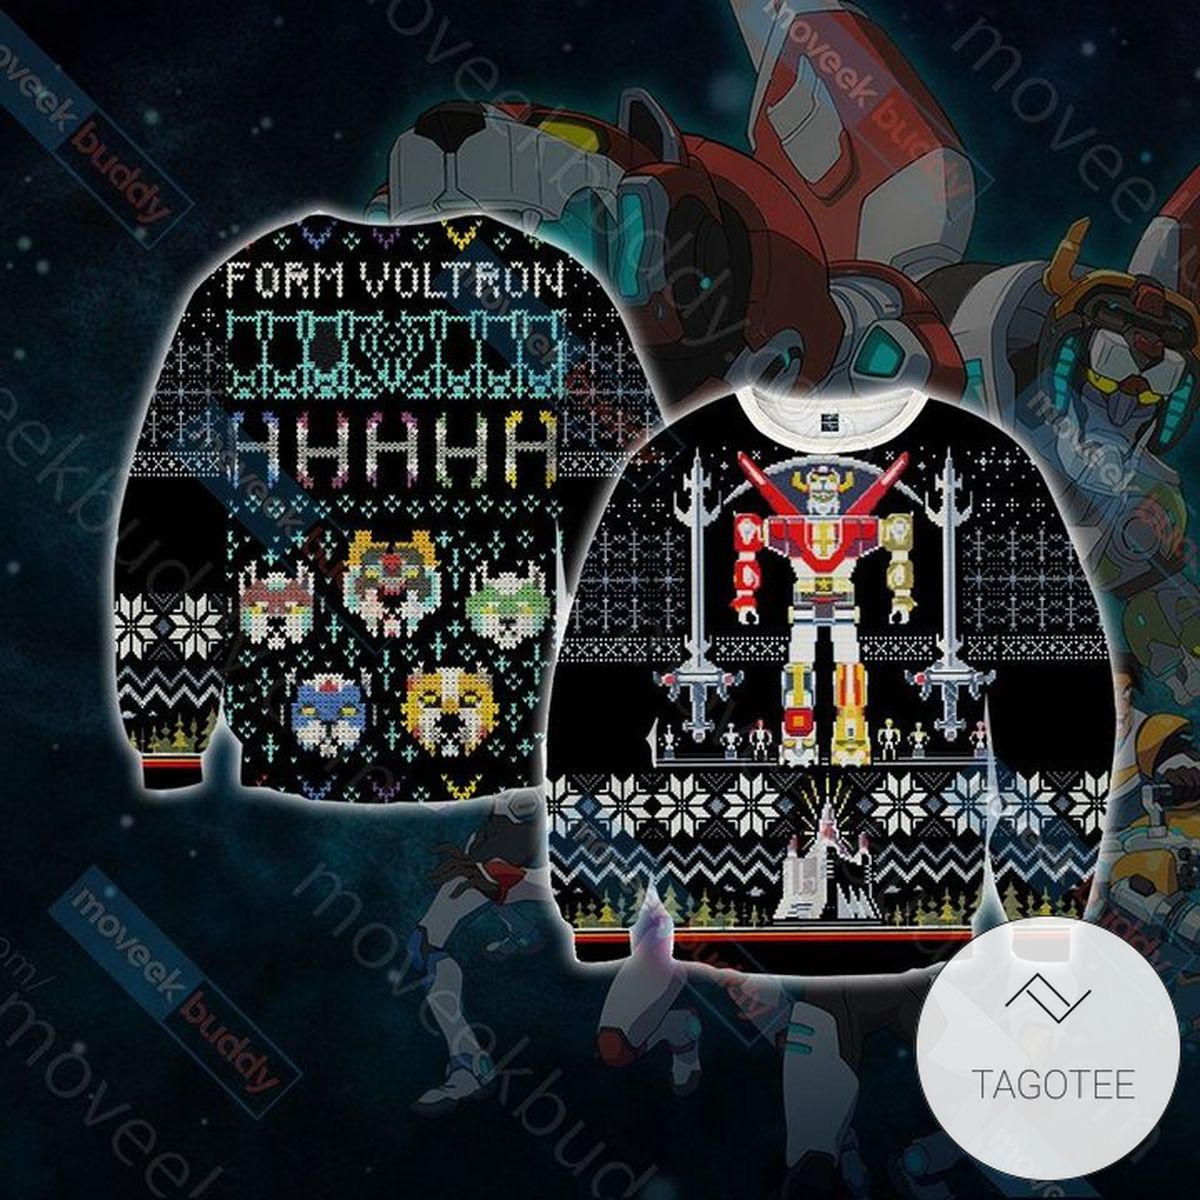 Voltron Knitting For Unisex Sweatshirt Knitted Ugly Christmas Sweater